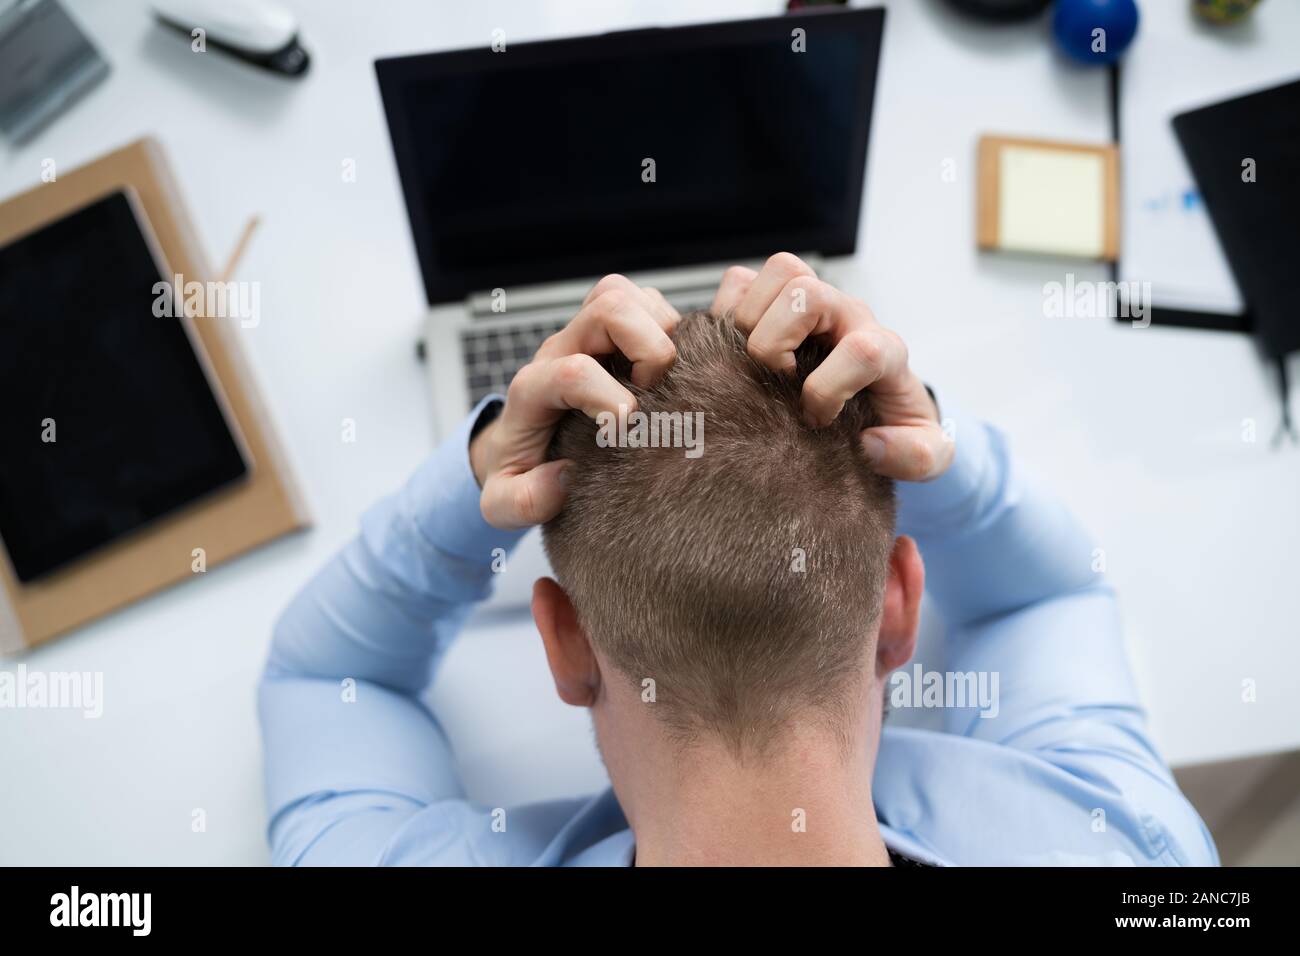 High Angle View Of Young Stressed Businessman In Front Of Laptop At Desk Stock Photo